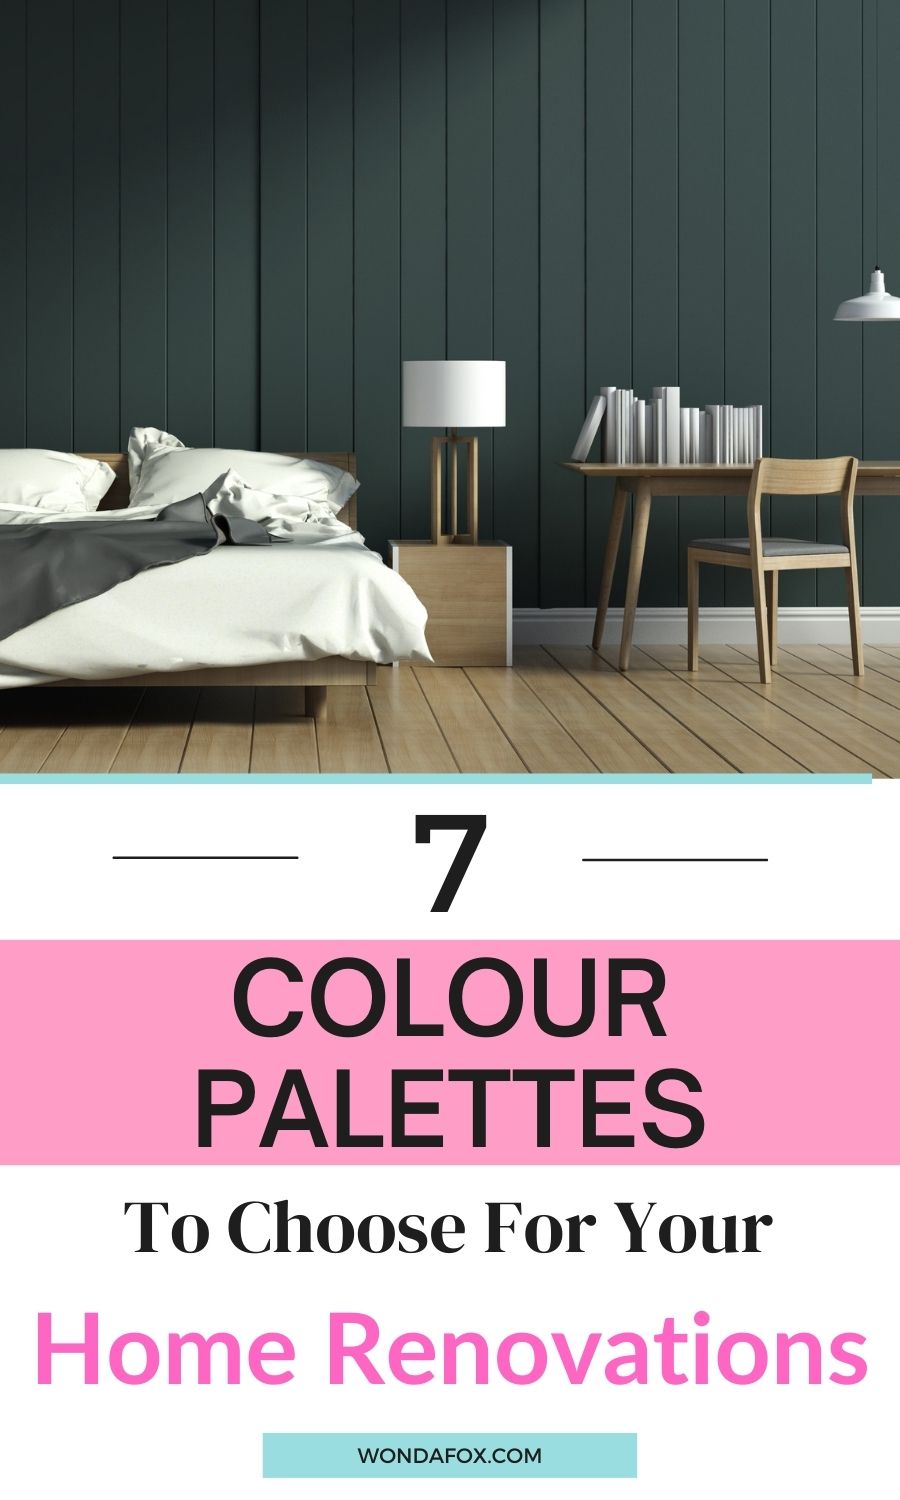 Colour Palettes to try for your next home renovation